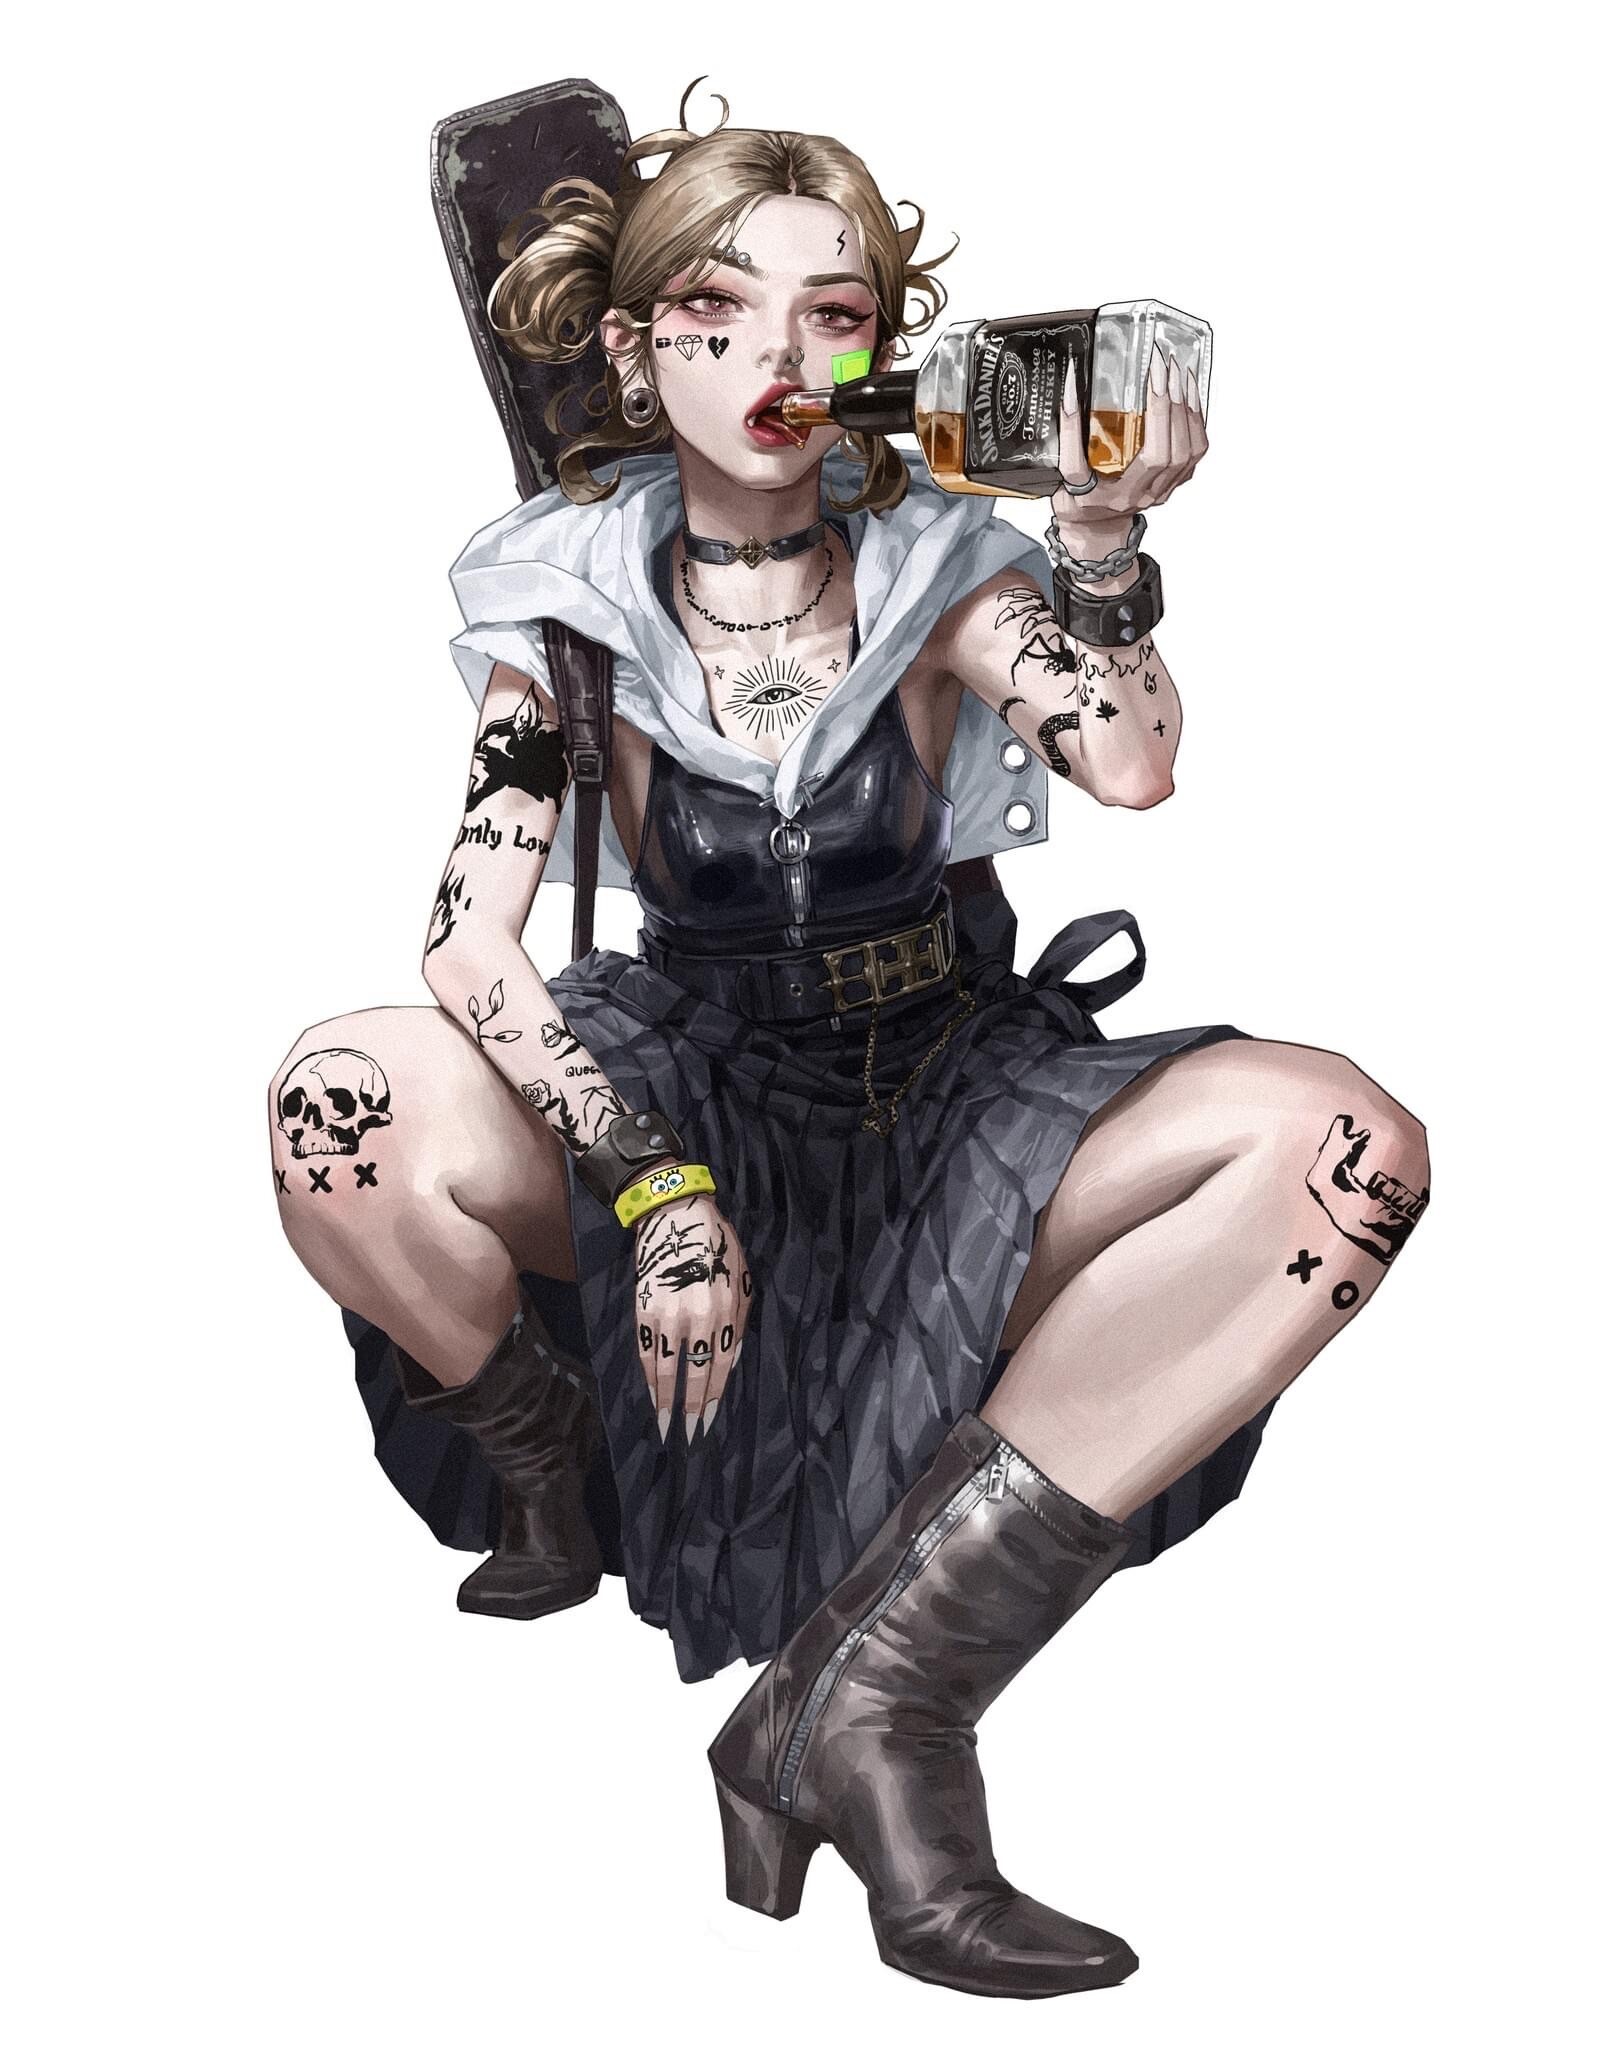 General 1621x2048 artwork women white background simple background bottles alcohol food Jack Daniel's brand Heart (Tattoo) open mouth vampires fantasy girl blonde looking at viewer inked girls tattoo drinking minimalism